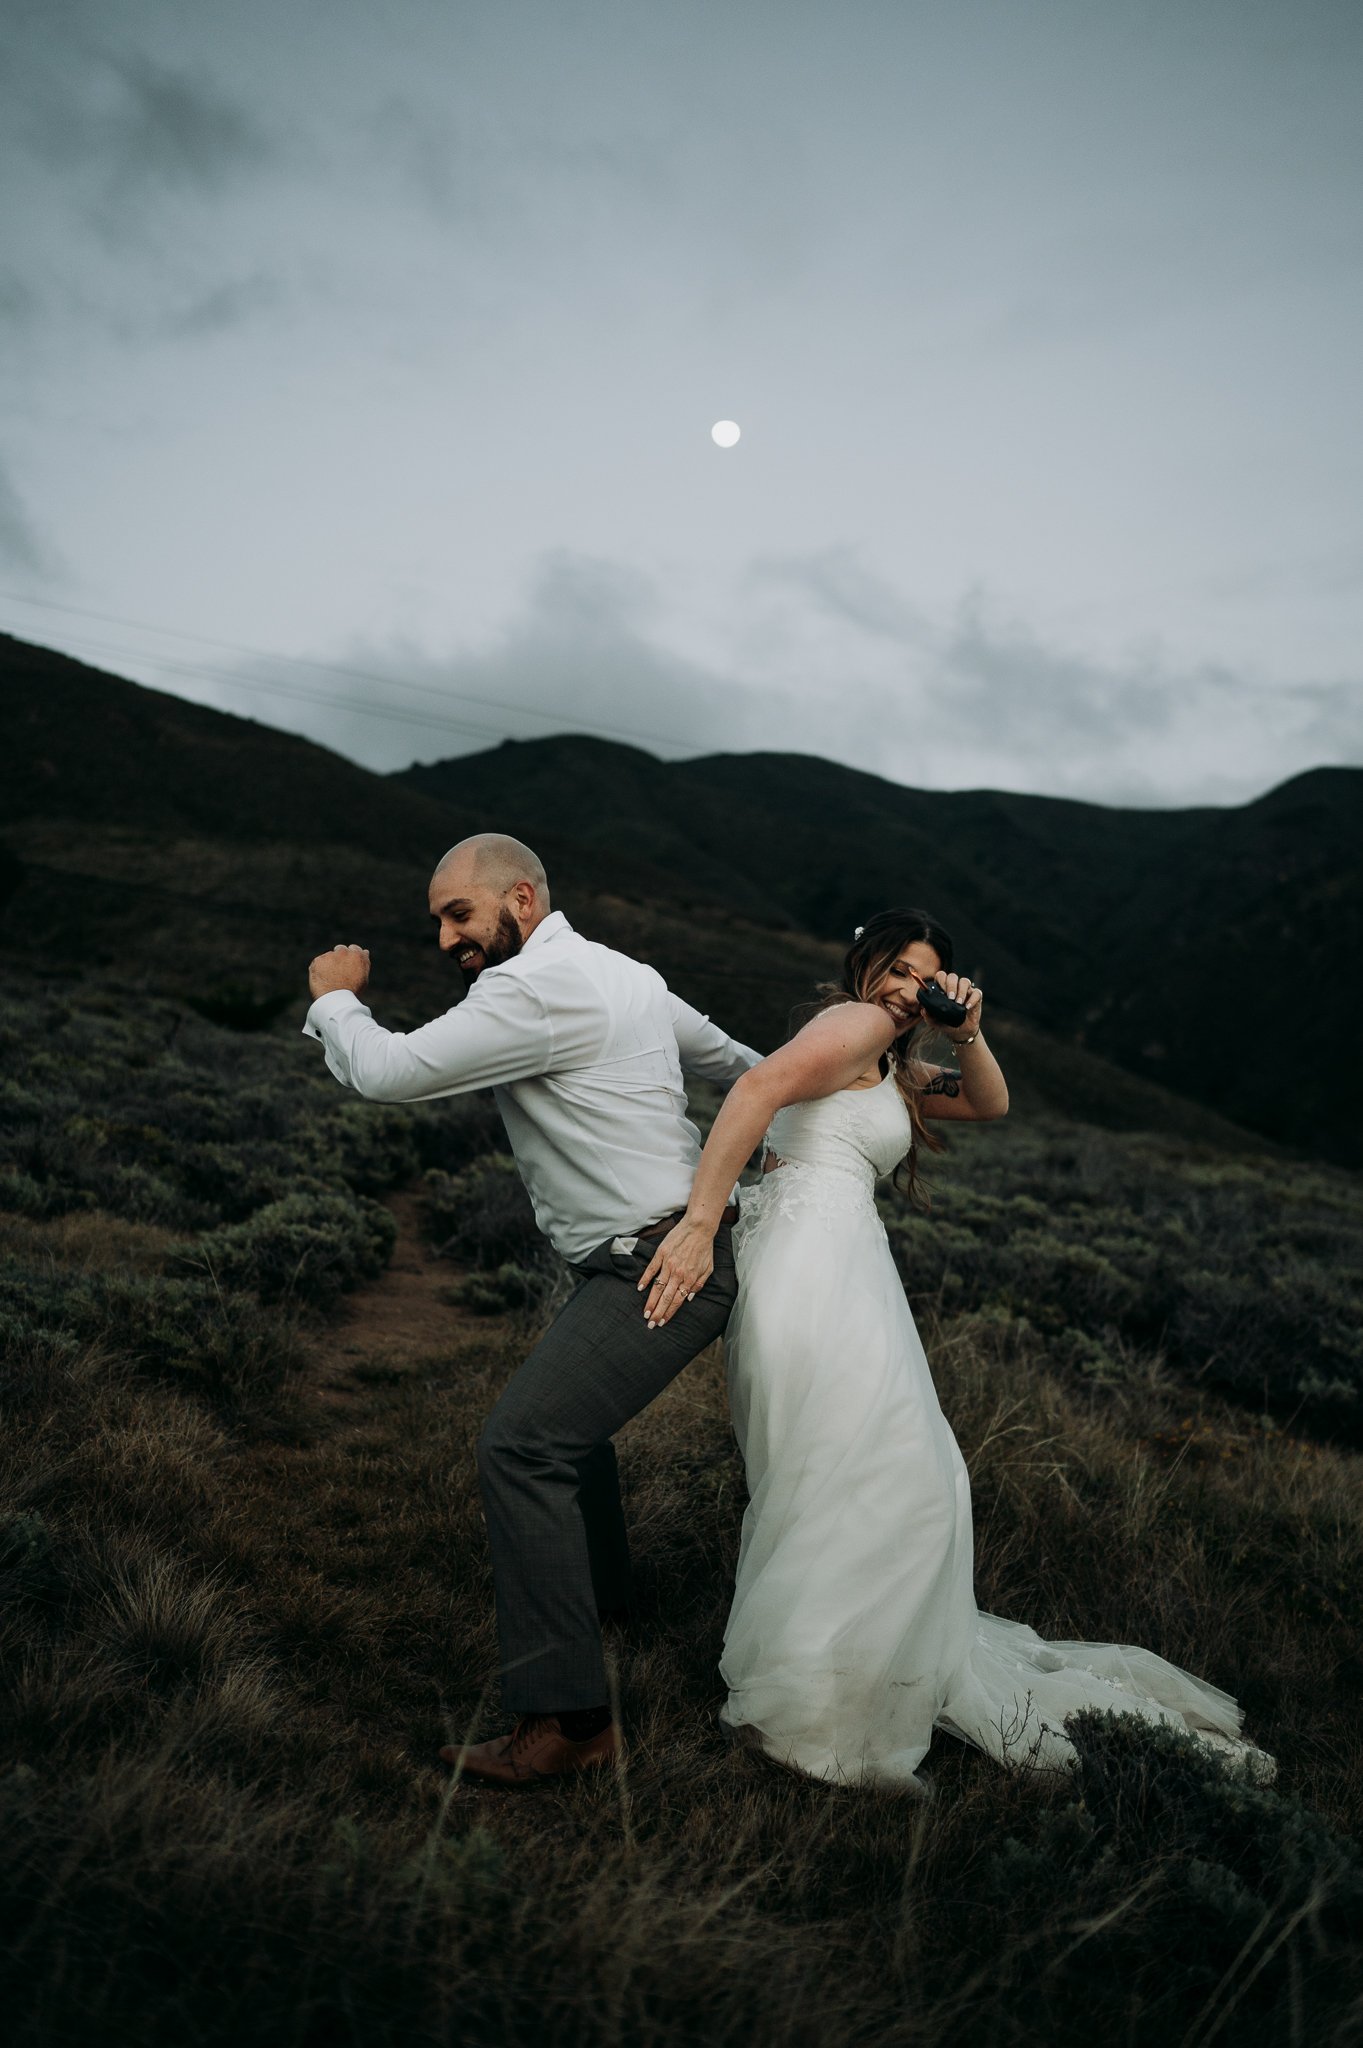 Newly married couple in wedding attire dancing on cliff in Big Sur California